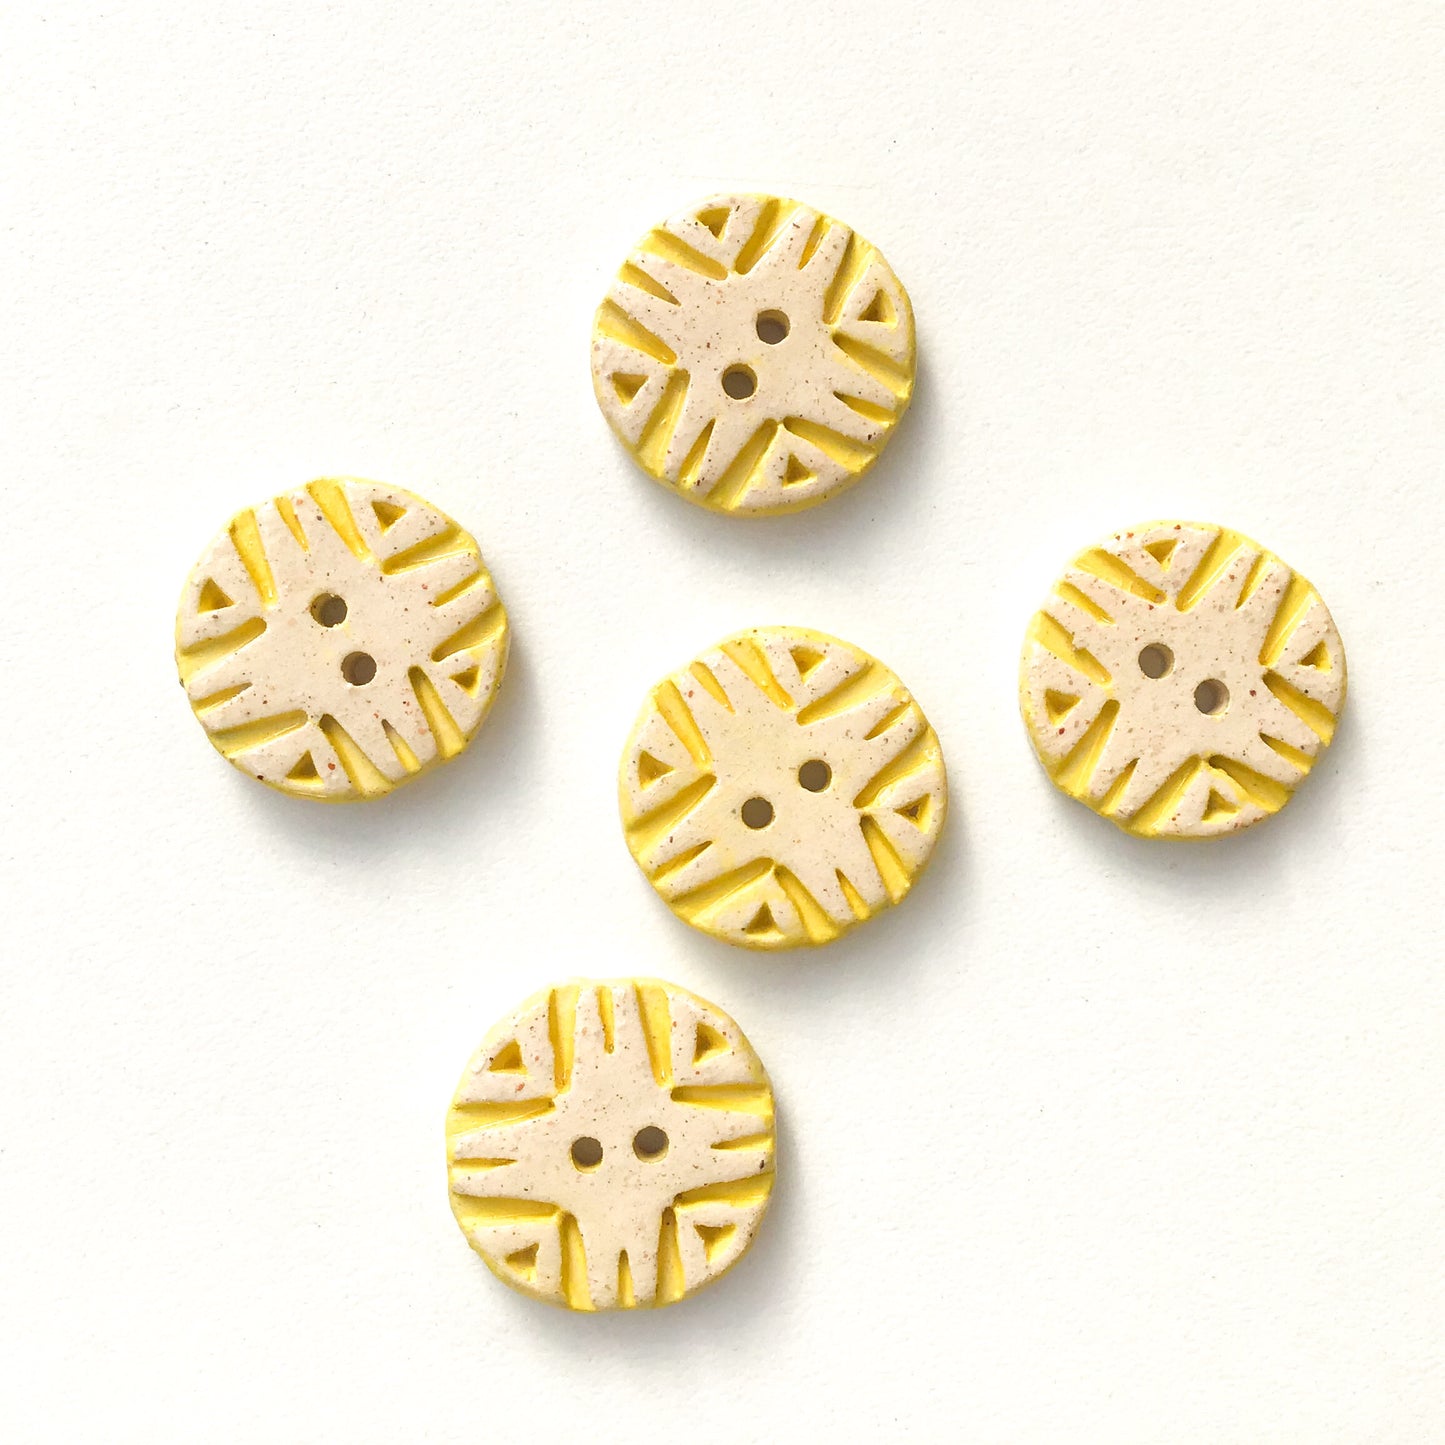 Yellow Hand Stamped Ceramic Buttons - Southwestern Style Clay Buttons - 3/4" - 5 Pack